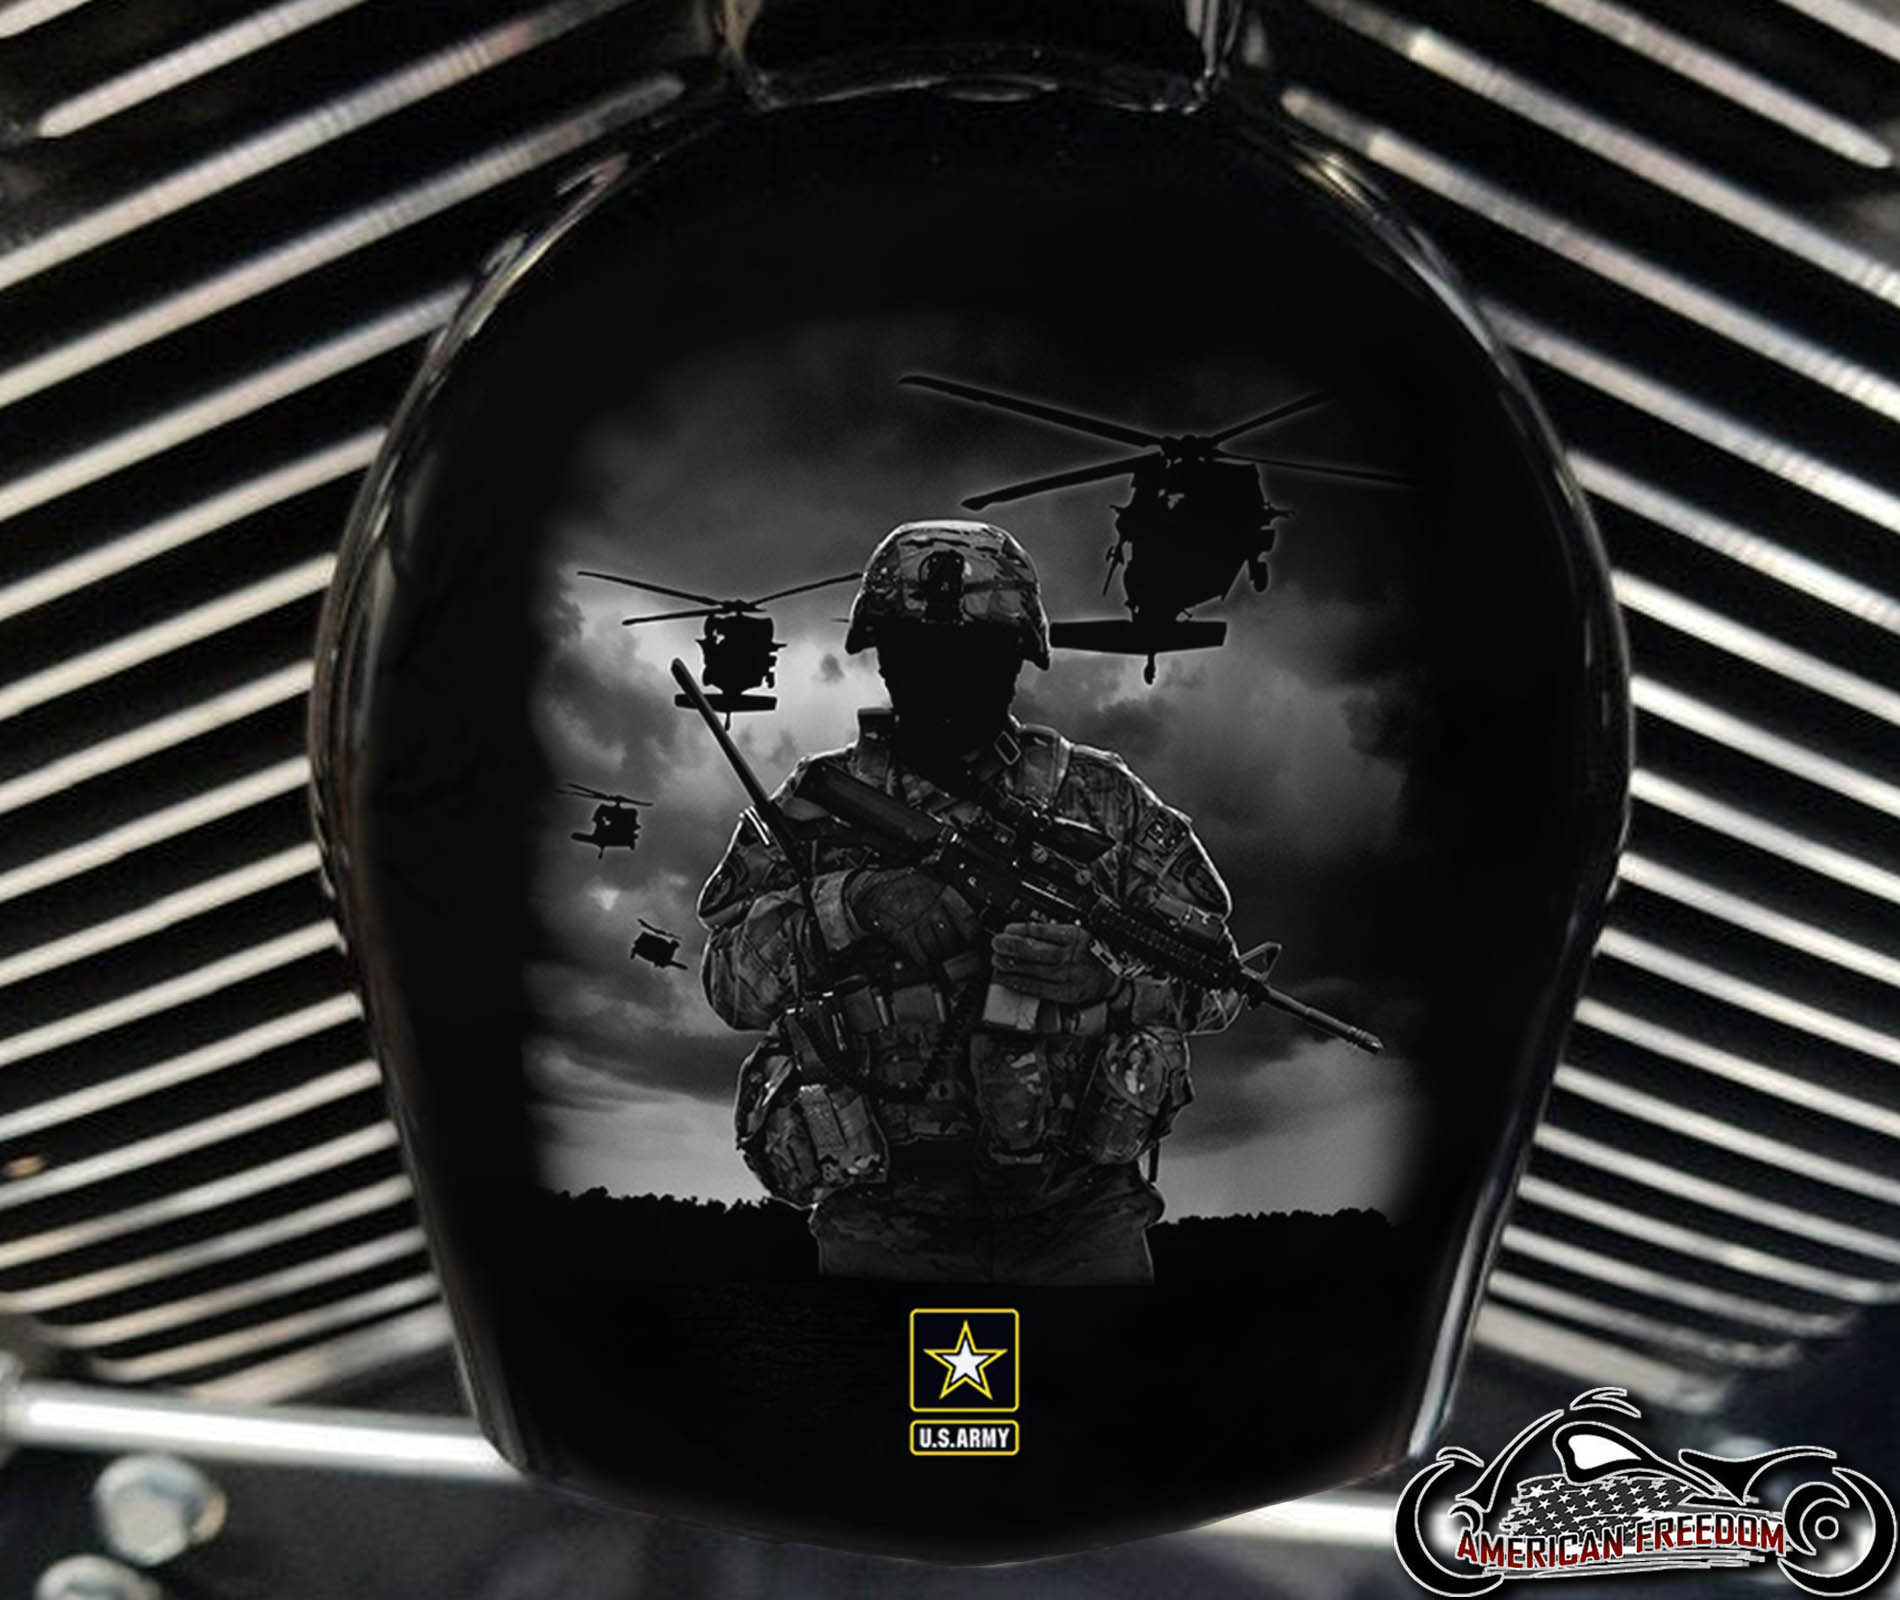 Custom Horn Cover - U.S. Army Soldier